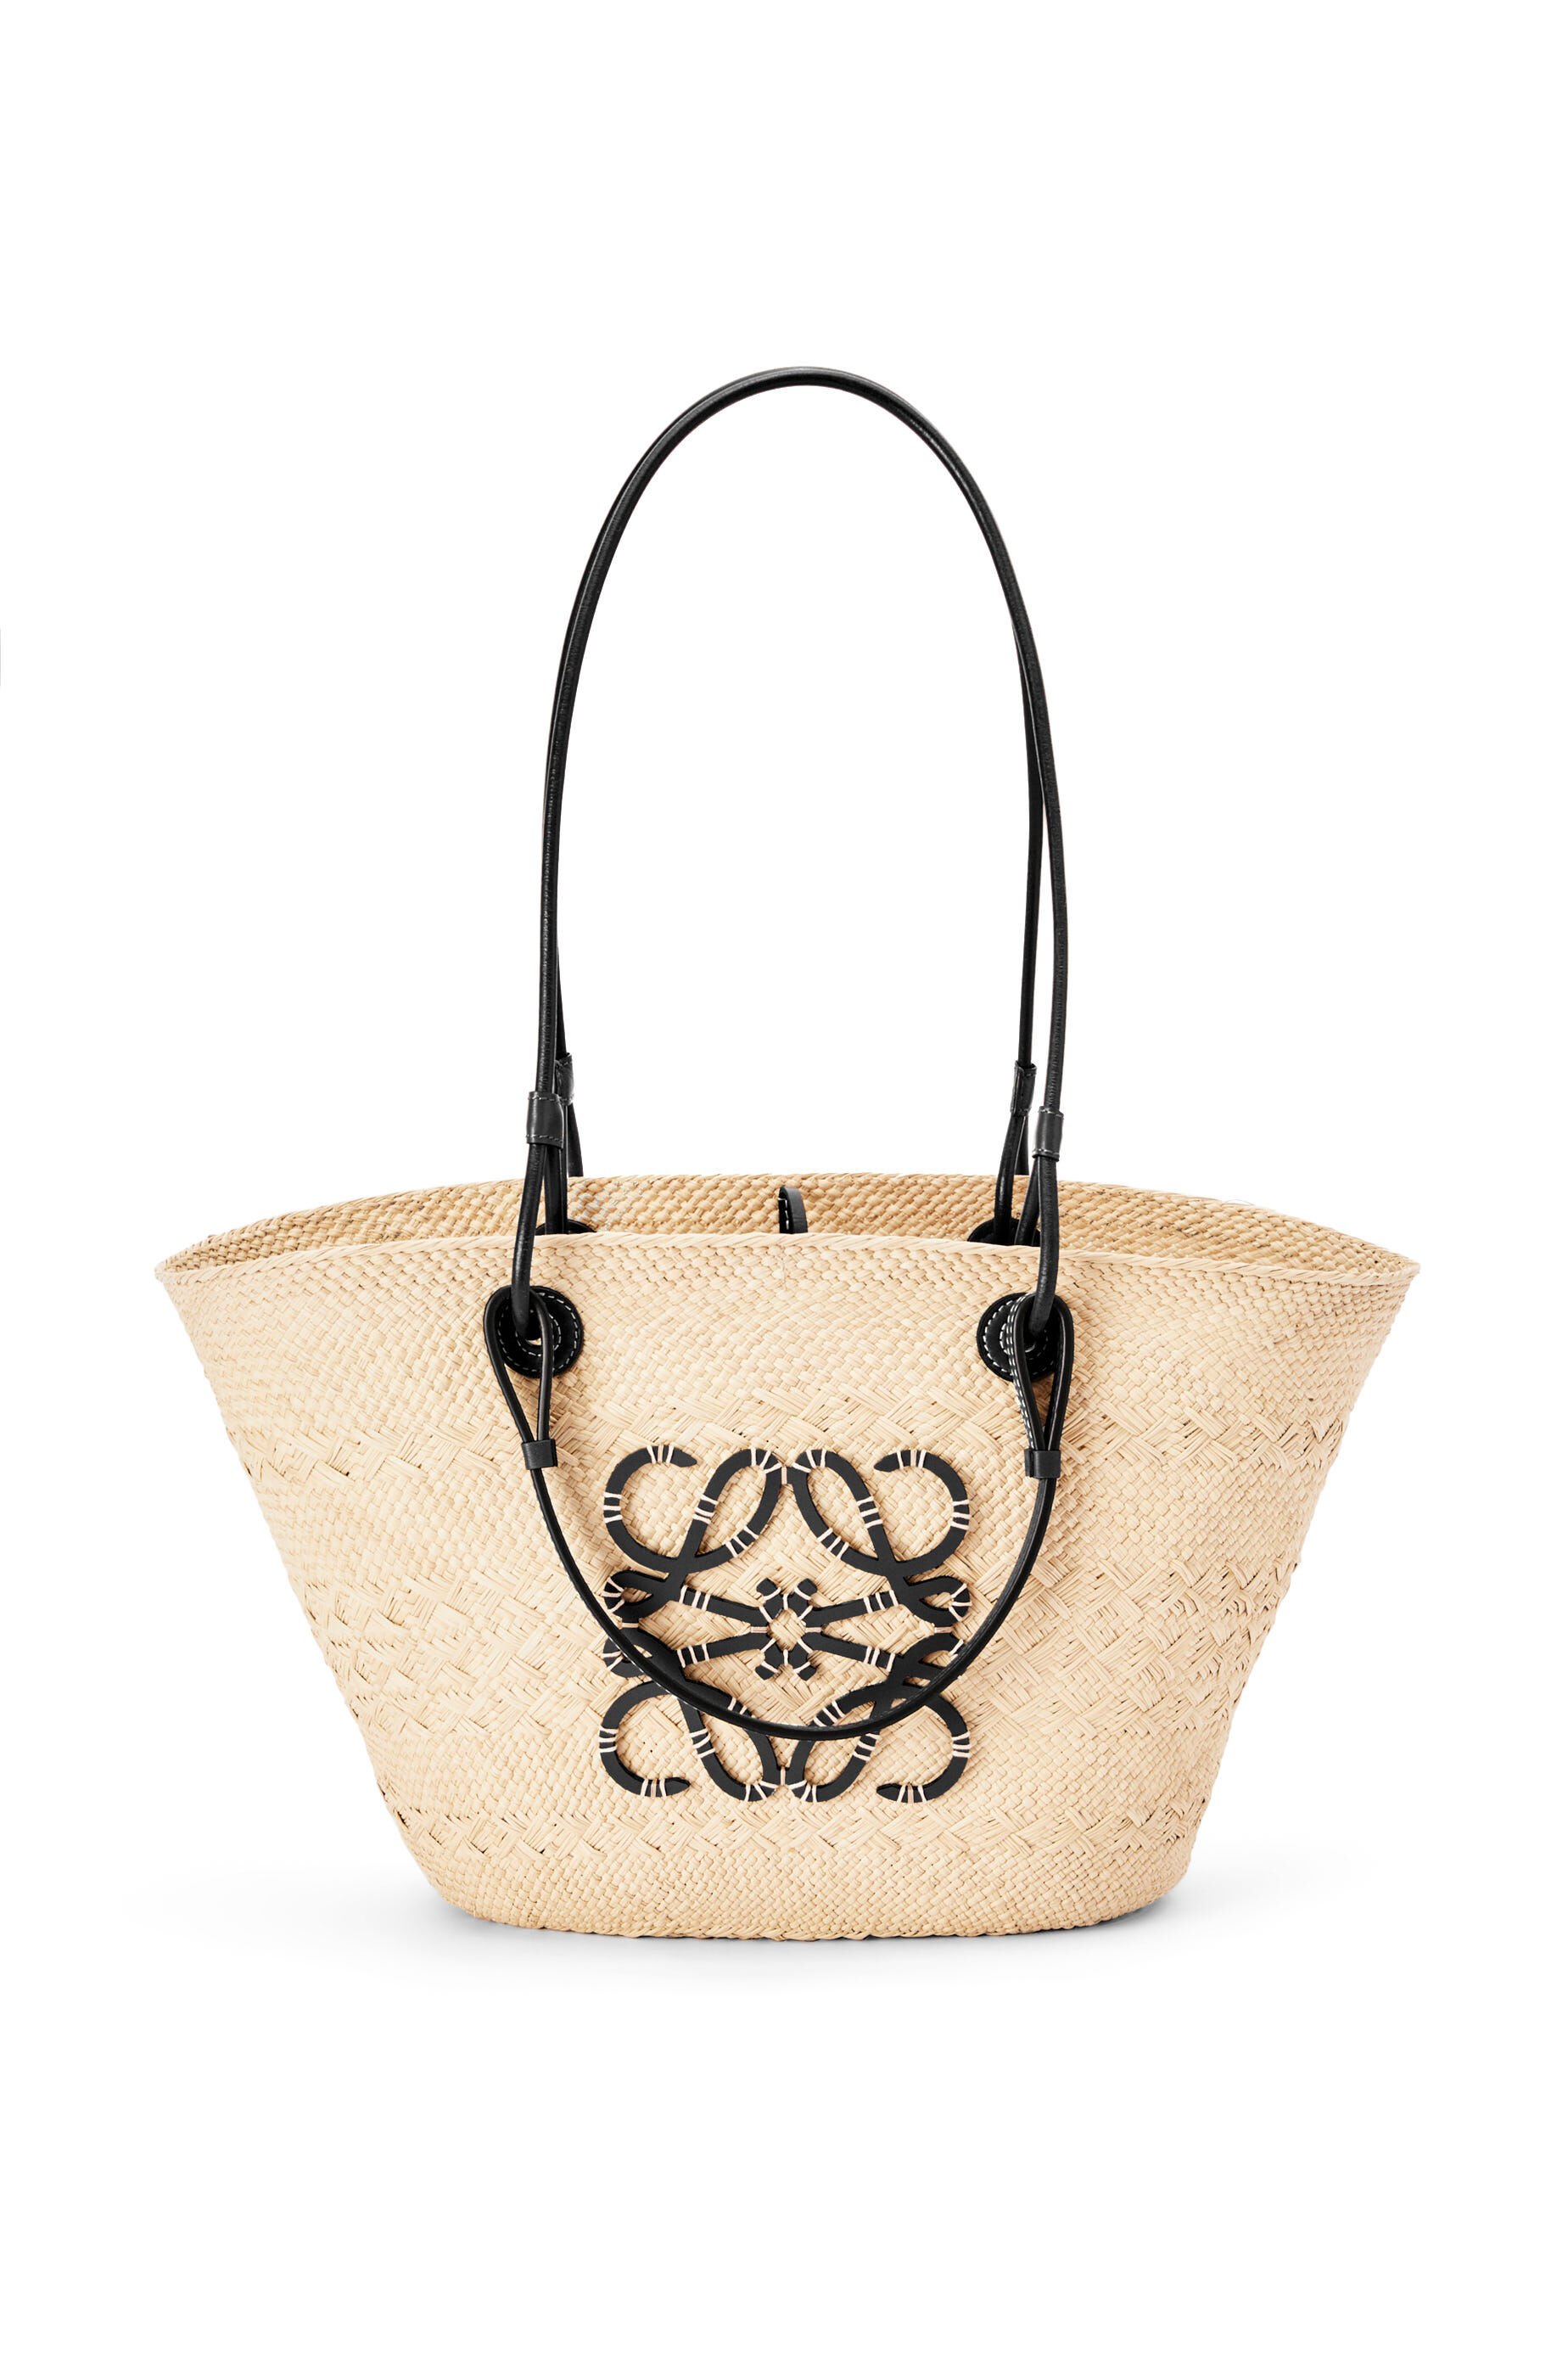 LOEWE introduces the new Paula's Ibiza collection